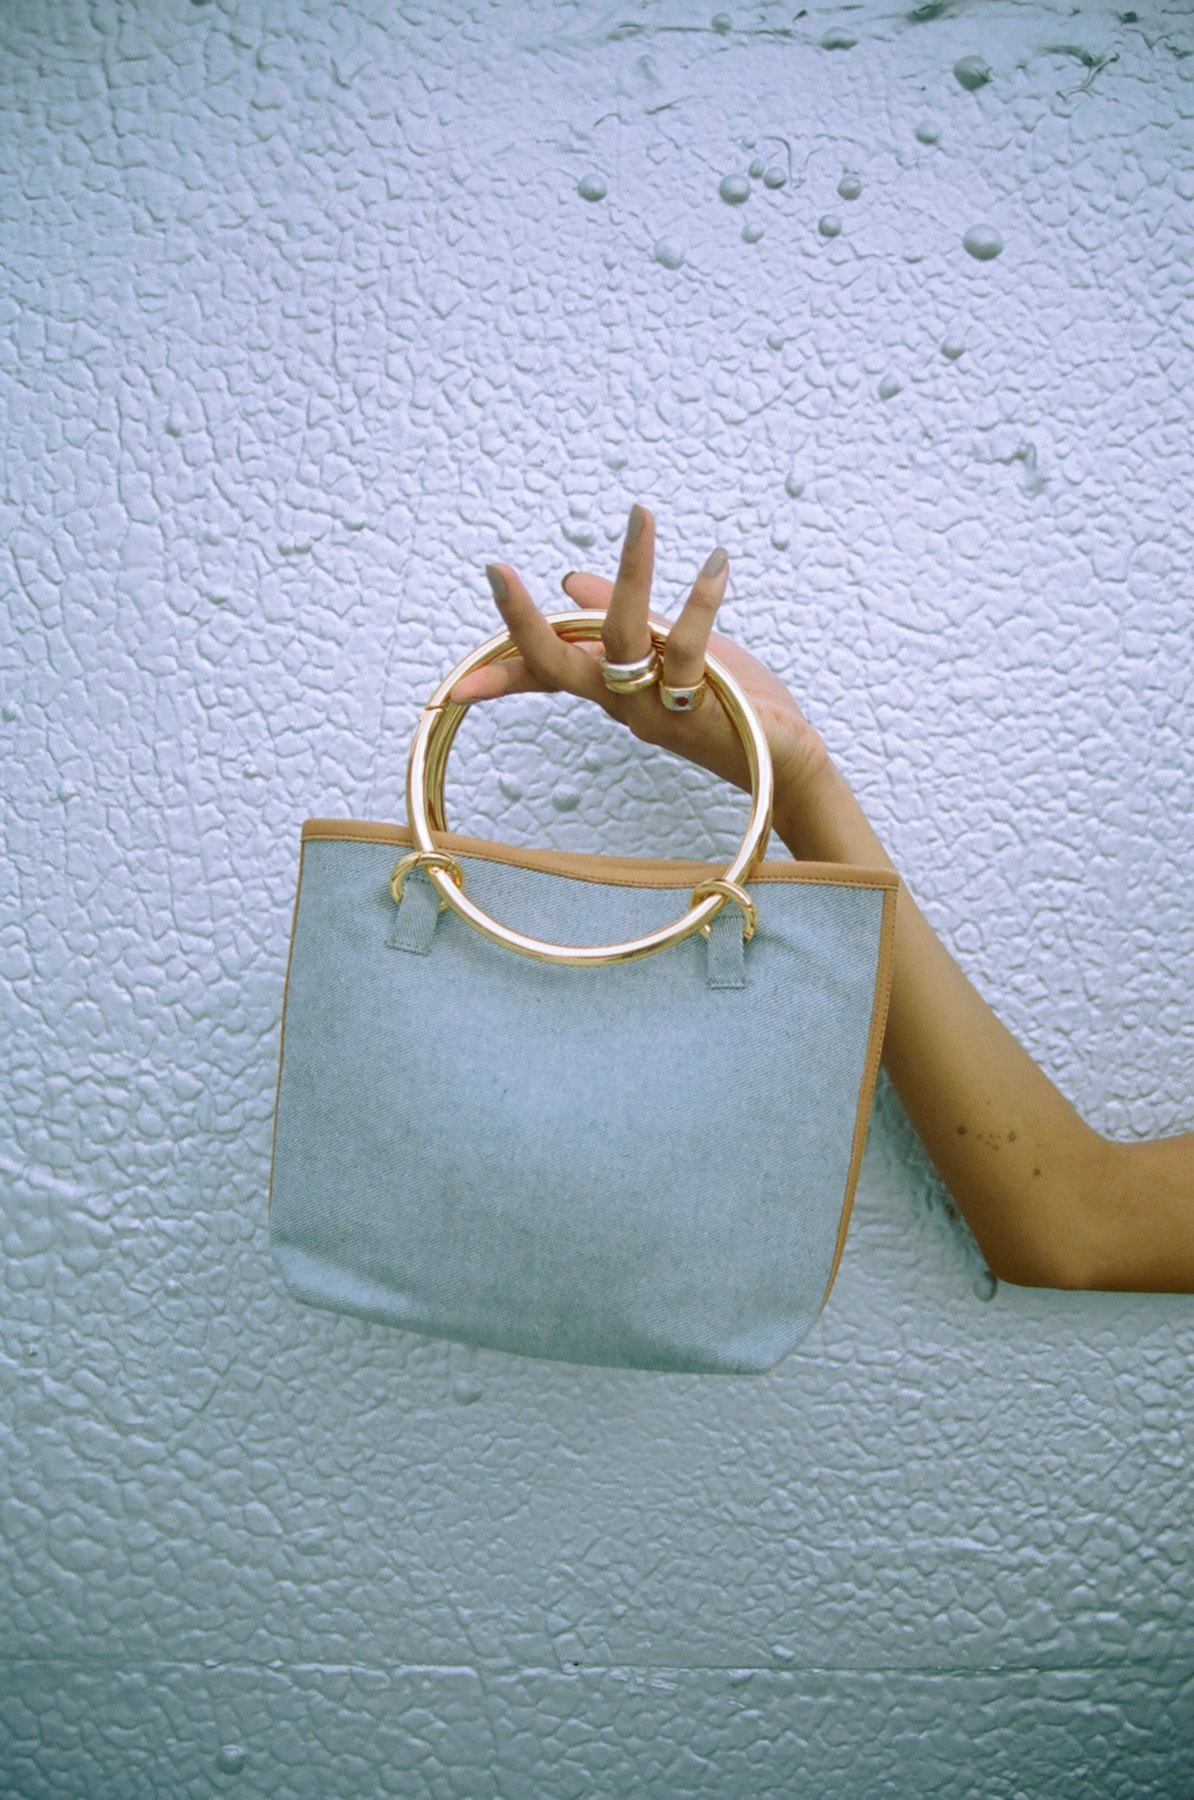 Janis Studios Ethical Denim Bag Collection Upcycled Interchangeable Handles DIY Mixing Matching